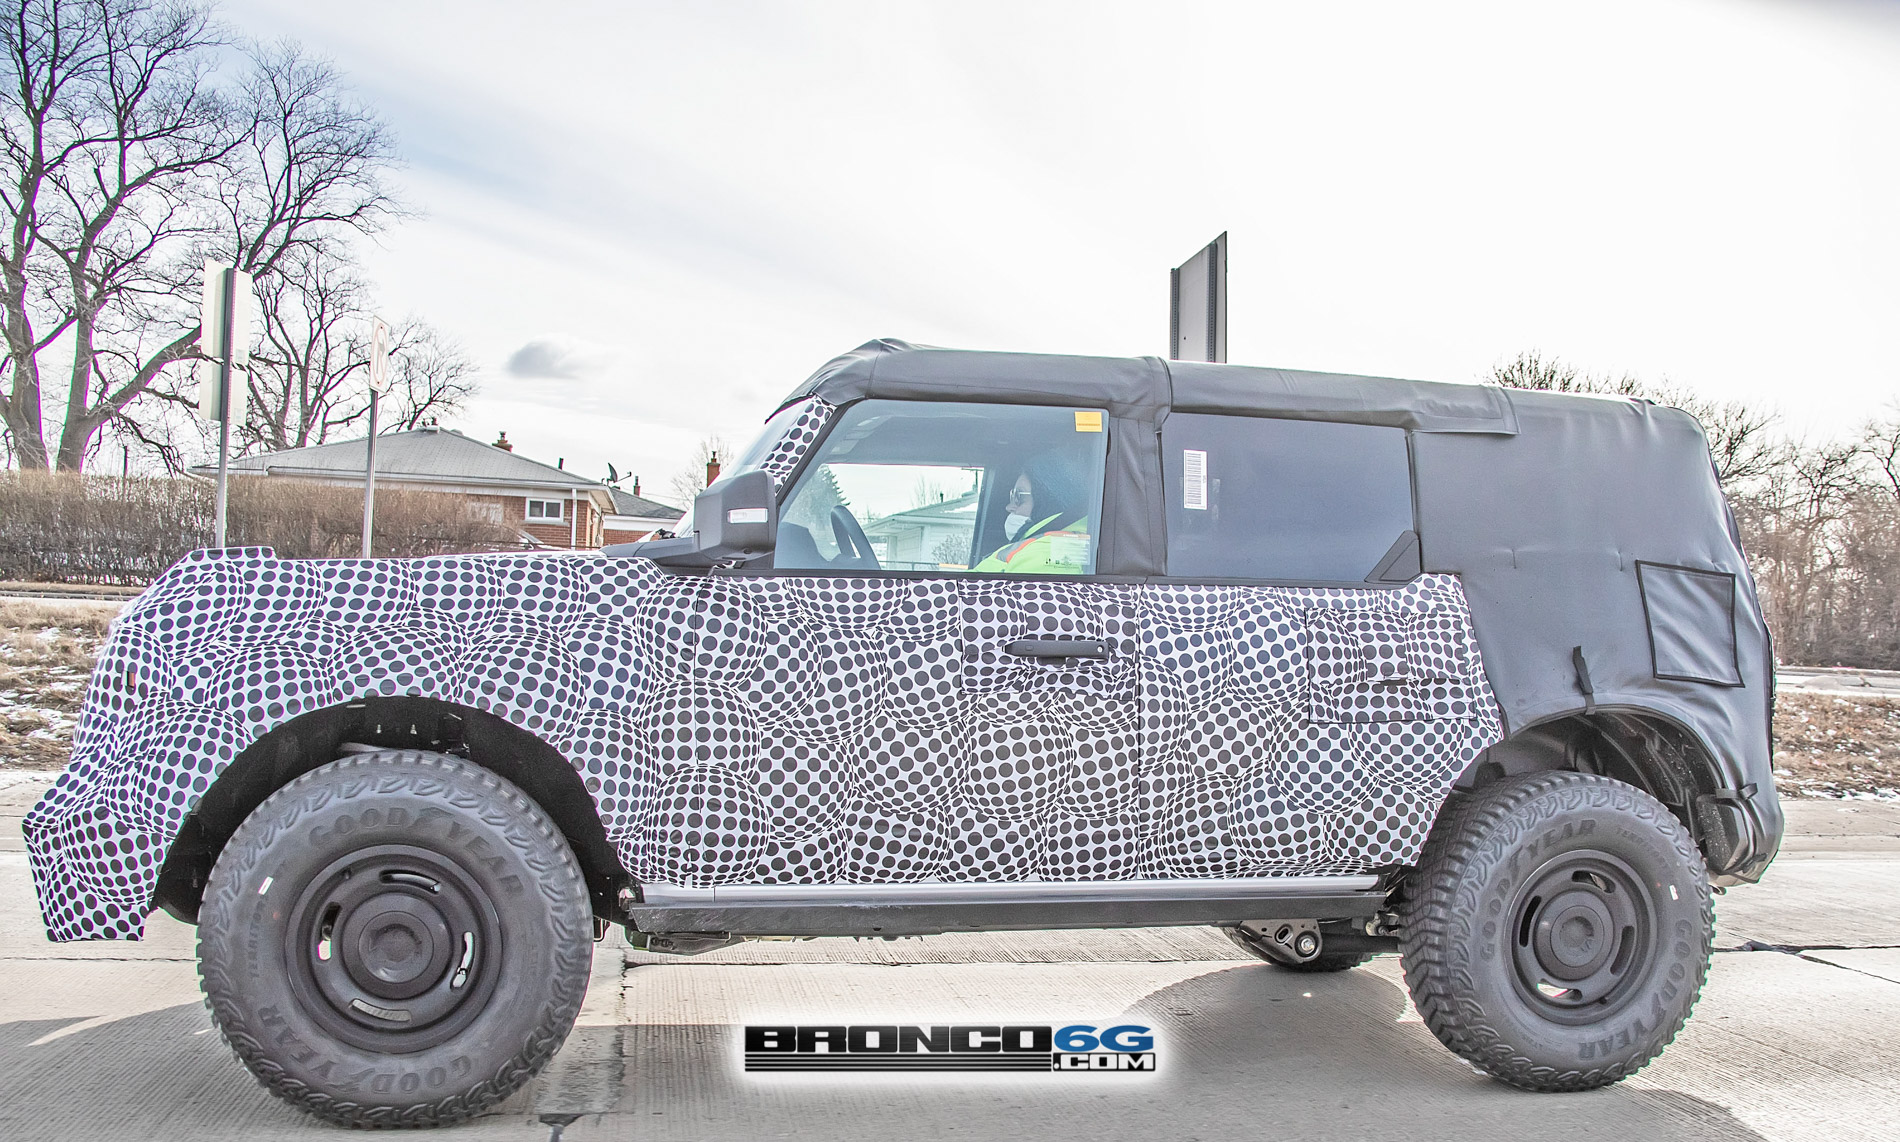 Ford Bronco HERITAGE EDITION Bronco Spied! Riding on 35's, Classic 4-Slot Wheel Design and White Grille! 1612300061999